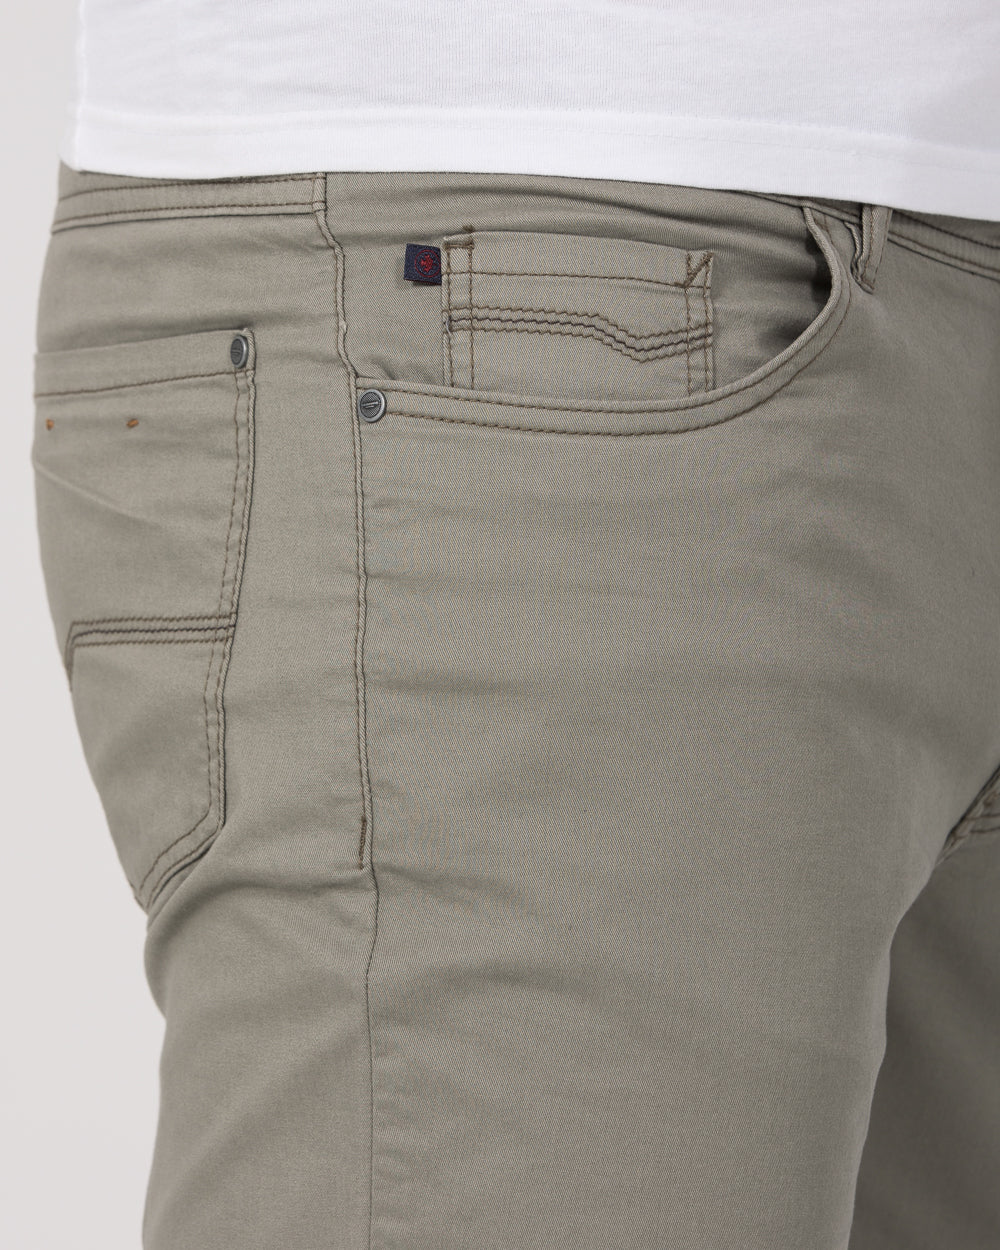 Redpoint Montreal Slim Fit Tall Jeans (khaki)